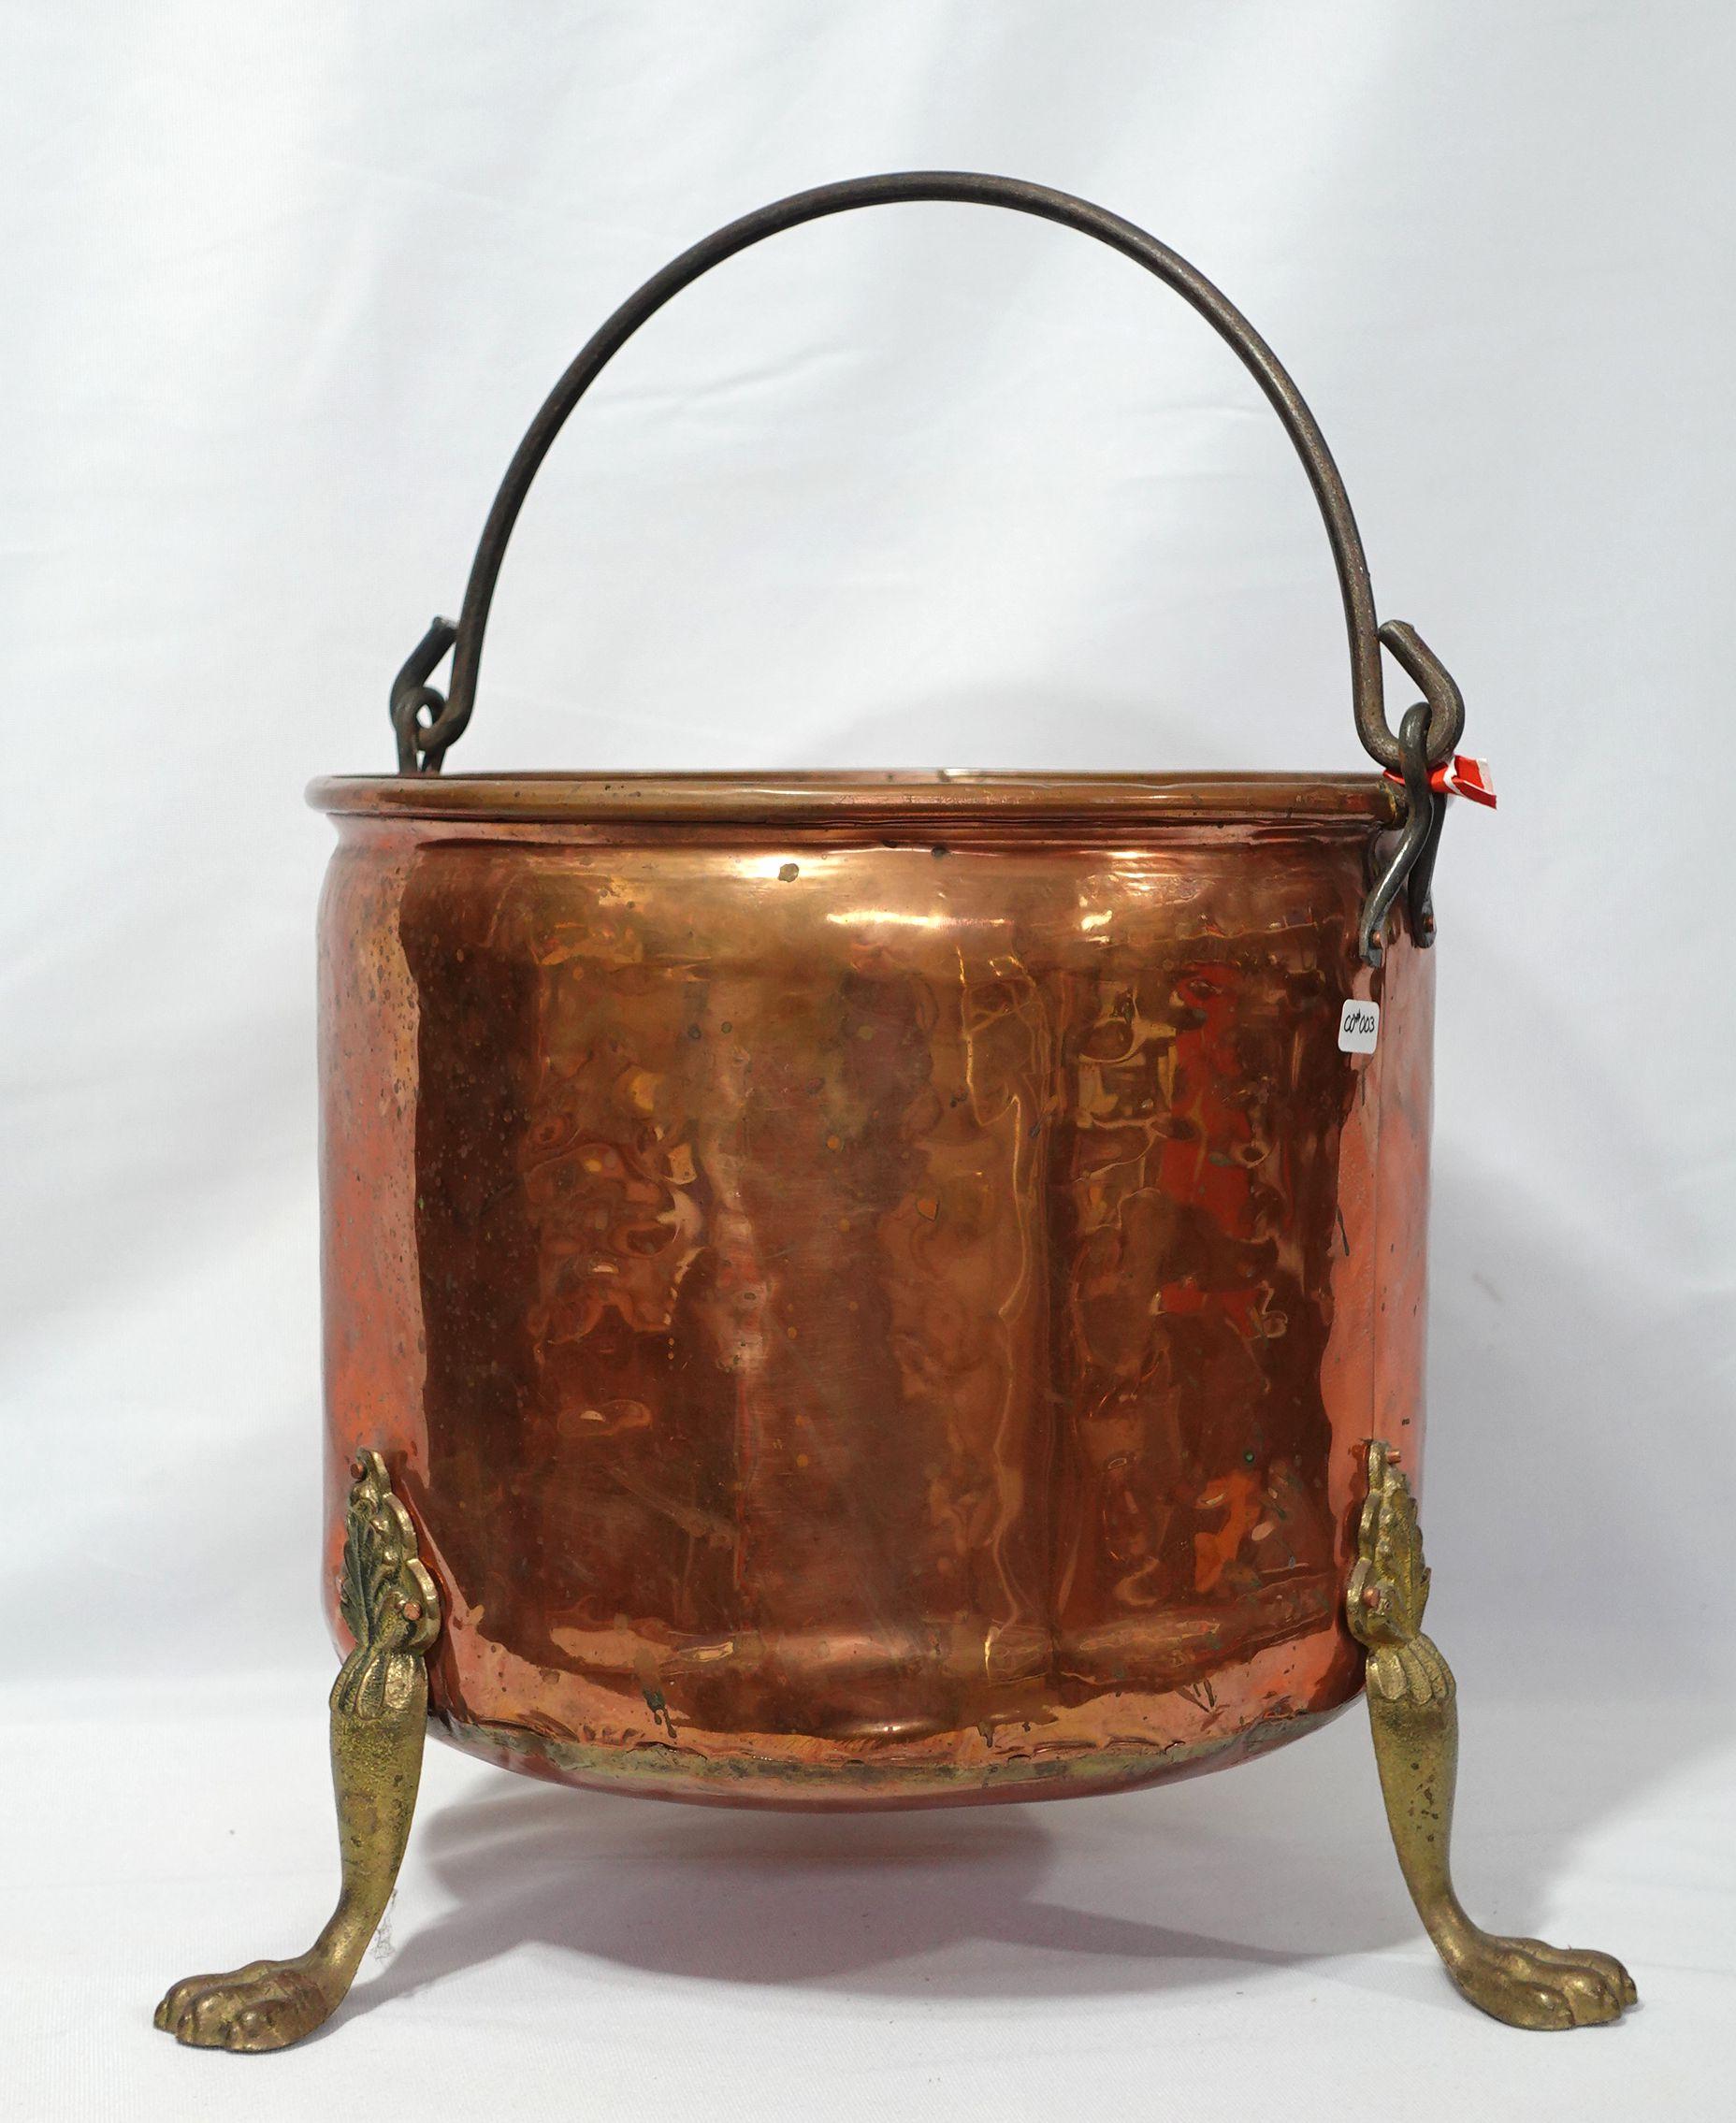 Old and Large Hand Hammered Footed Copper Bucket/Stockpot with 3 Brass Claw Feet, CO#003
Made in the Republic of Ireland, 1950s.
11.25